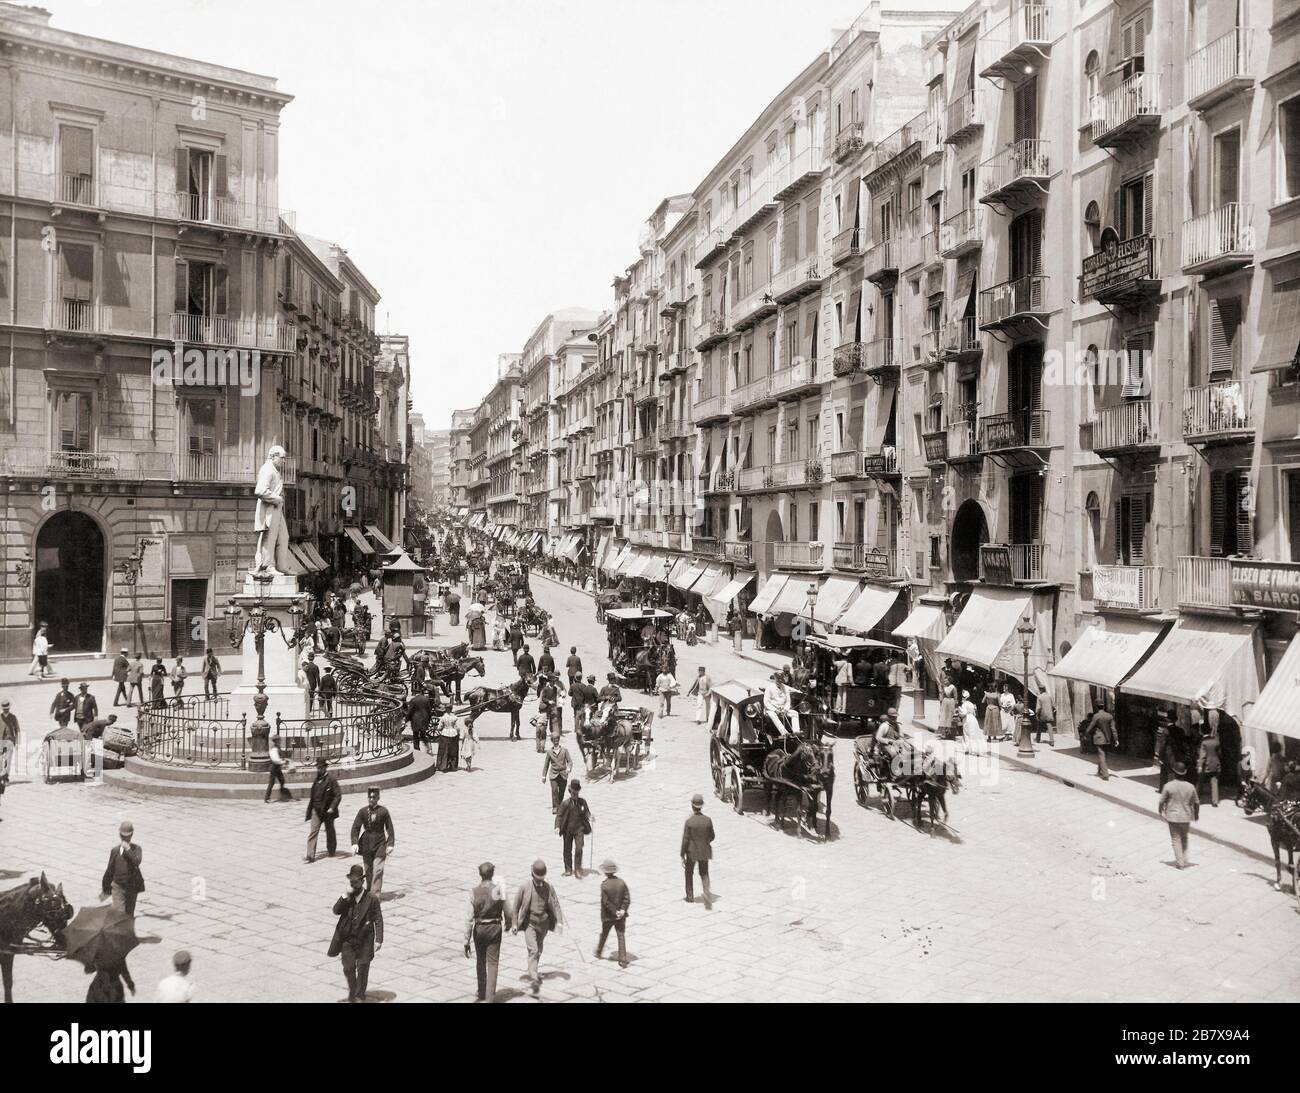 The Via Roma in Naples, Italy circa 1895.   The street is now called Via Toledo.  The statue on left is of Italian poet Carlo Poerio, 1804 - 1867.  After a work by German photographer Giorgio Sommer, 1834 - 1914. Stock Photo